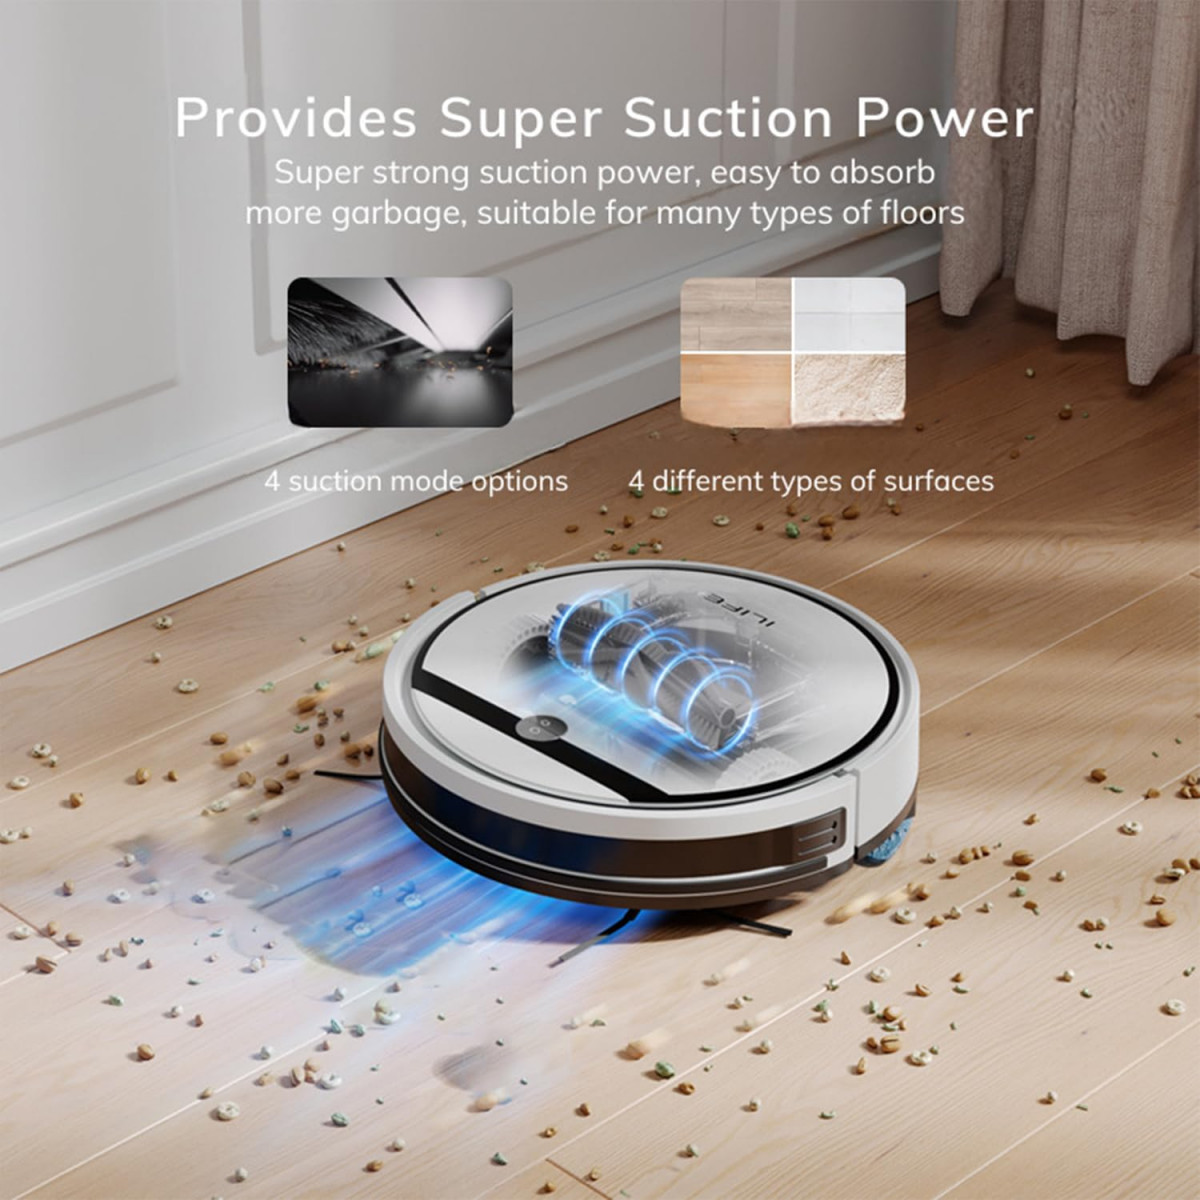 ILIFE V3x Robotic Vacuum Cleaner Powerful Suction Daily Schedule Cleaning Ideal for Hard Floor Hairs and Low Pile CarpetVacuum and Mop White